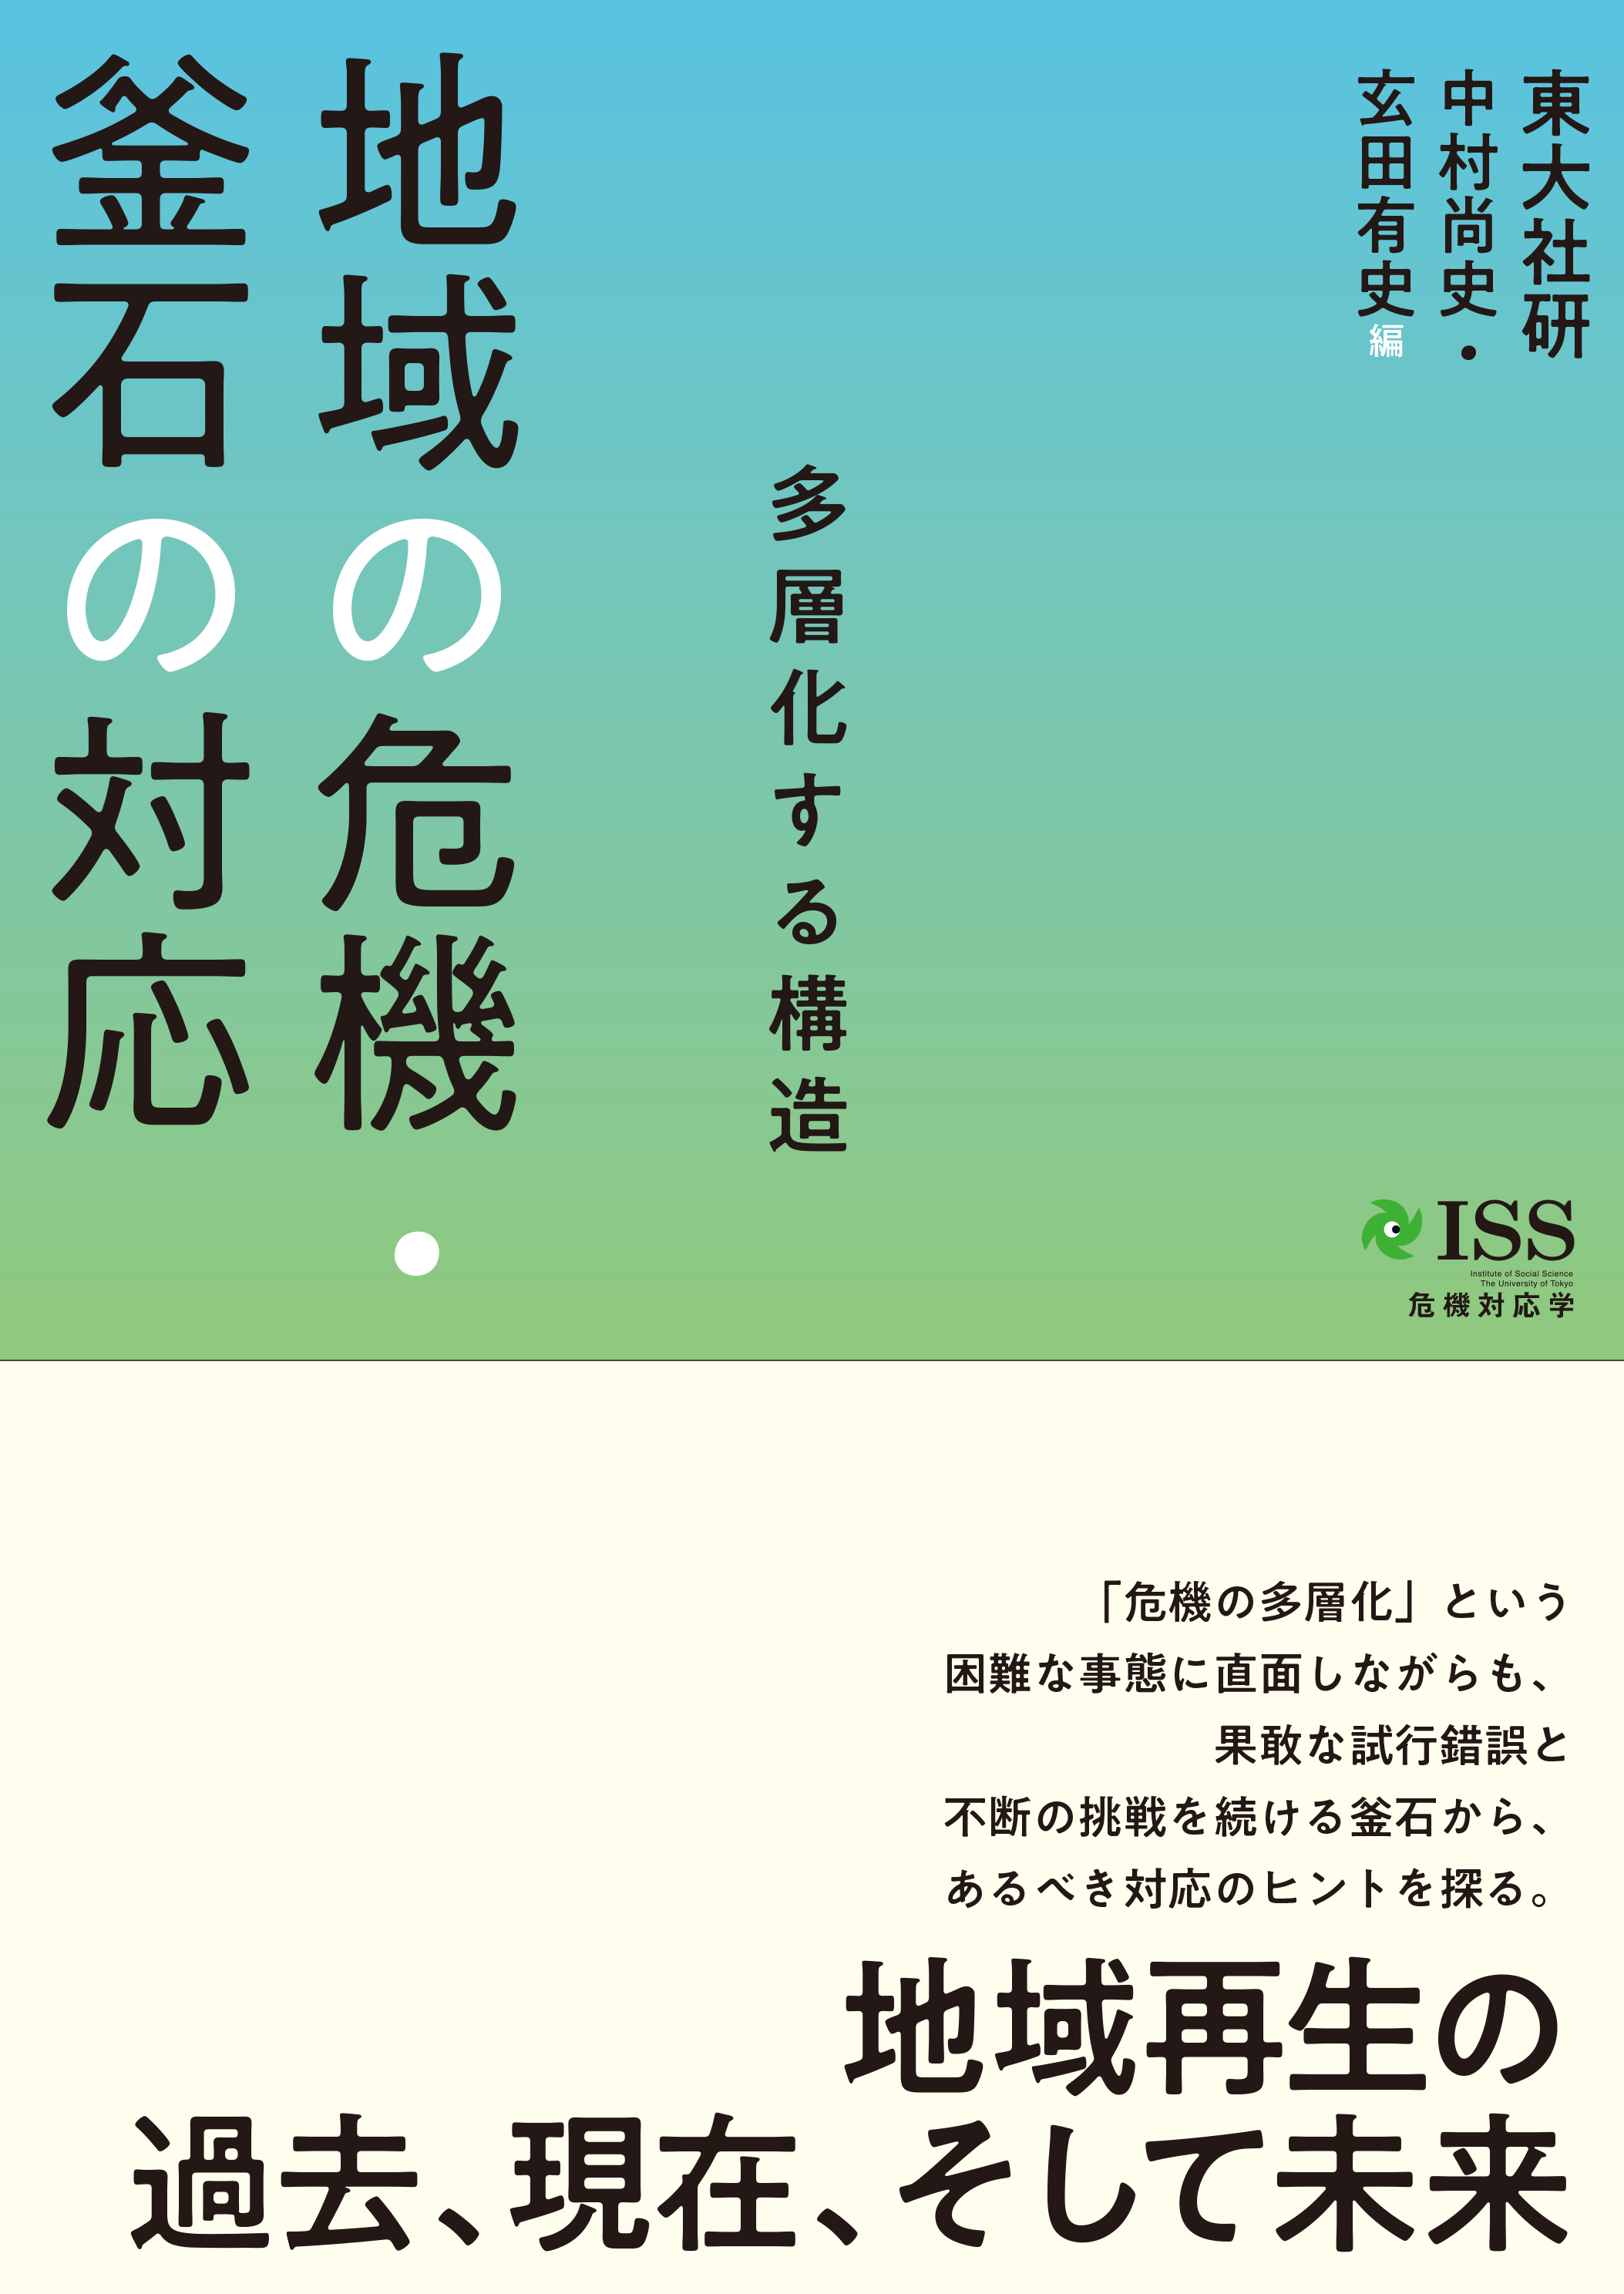 light blue and light green cover